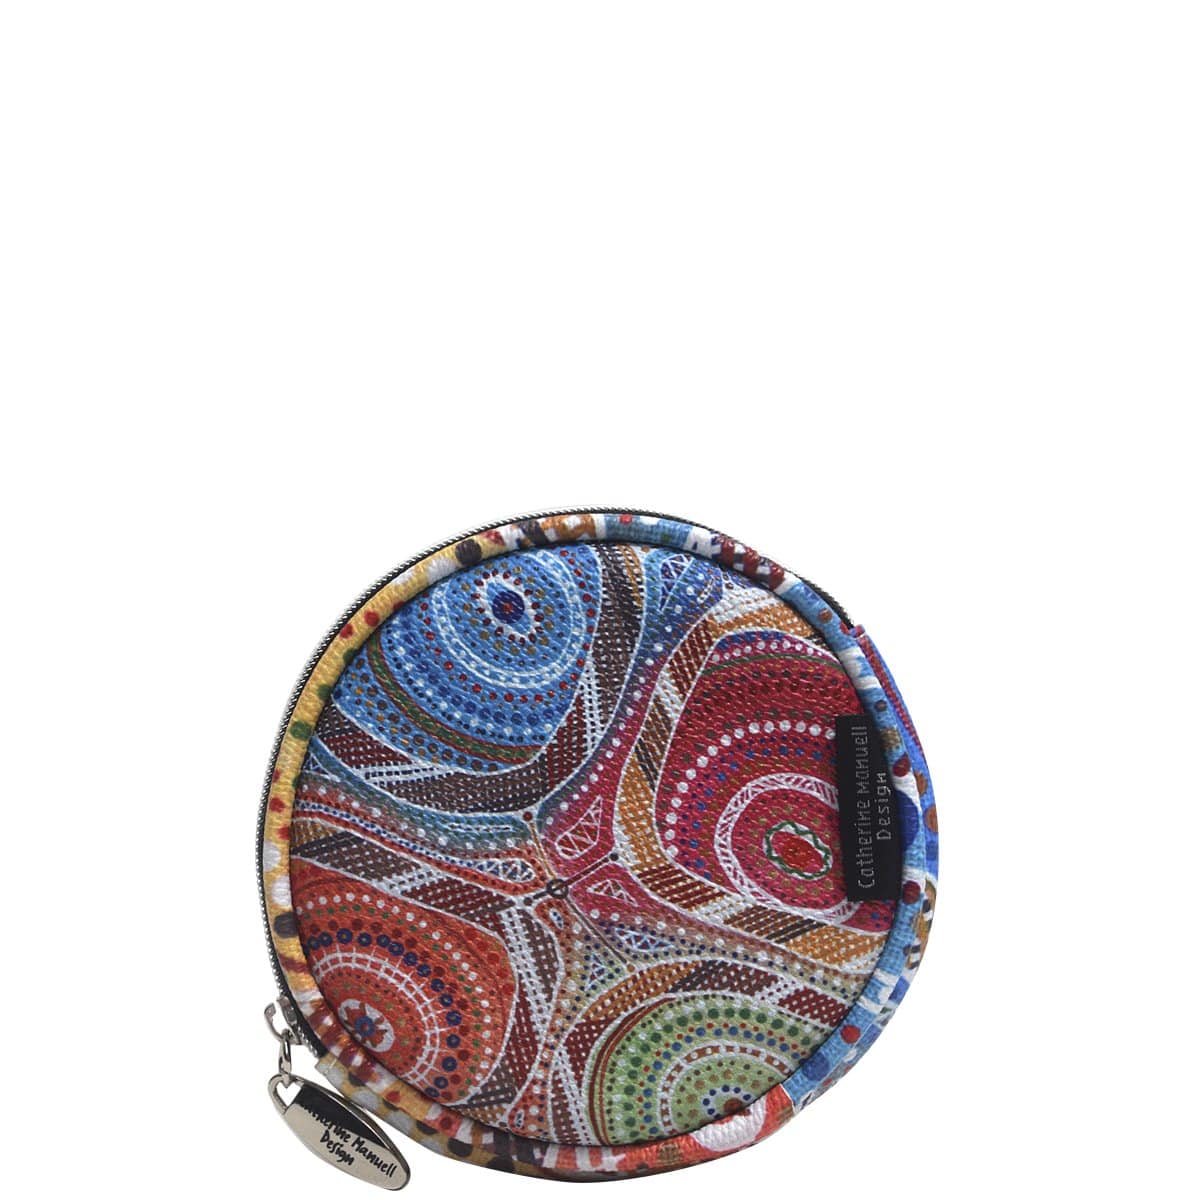 Full Moon Coin Purse AAP - Elements